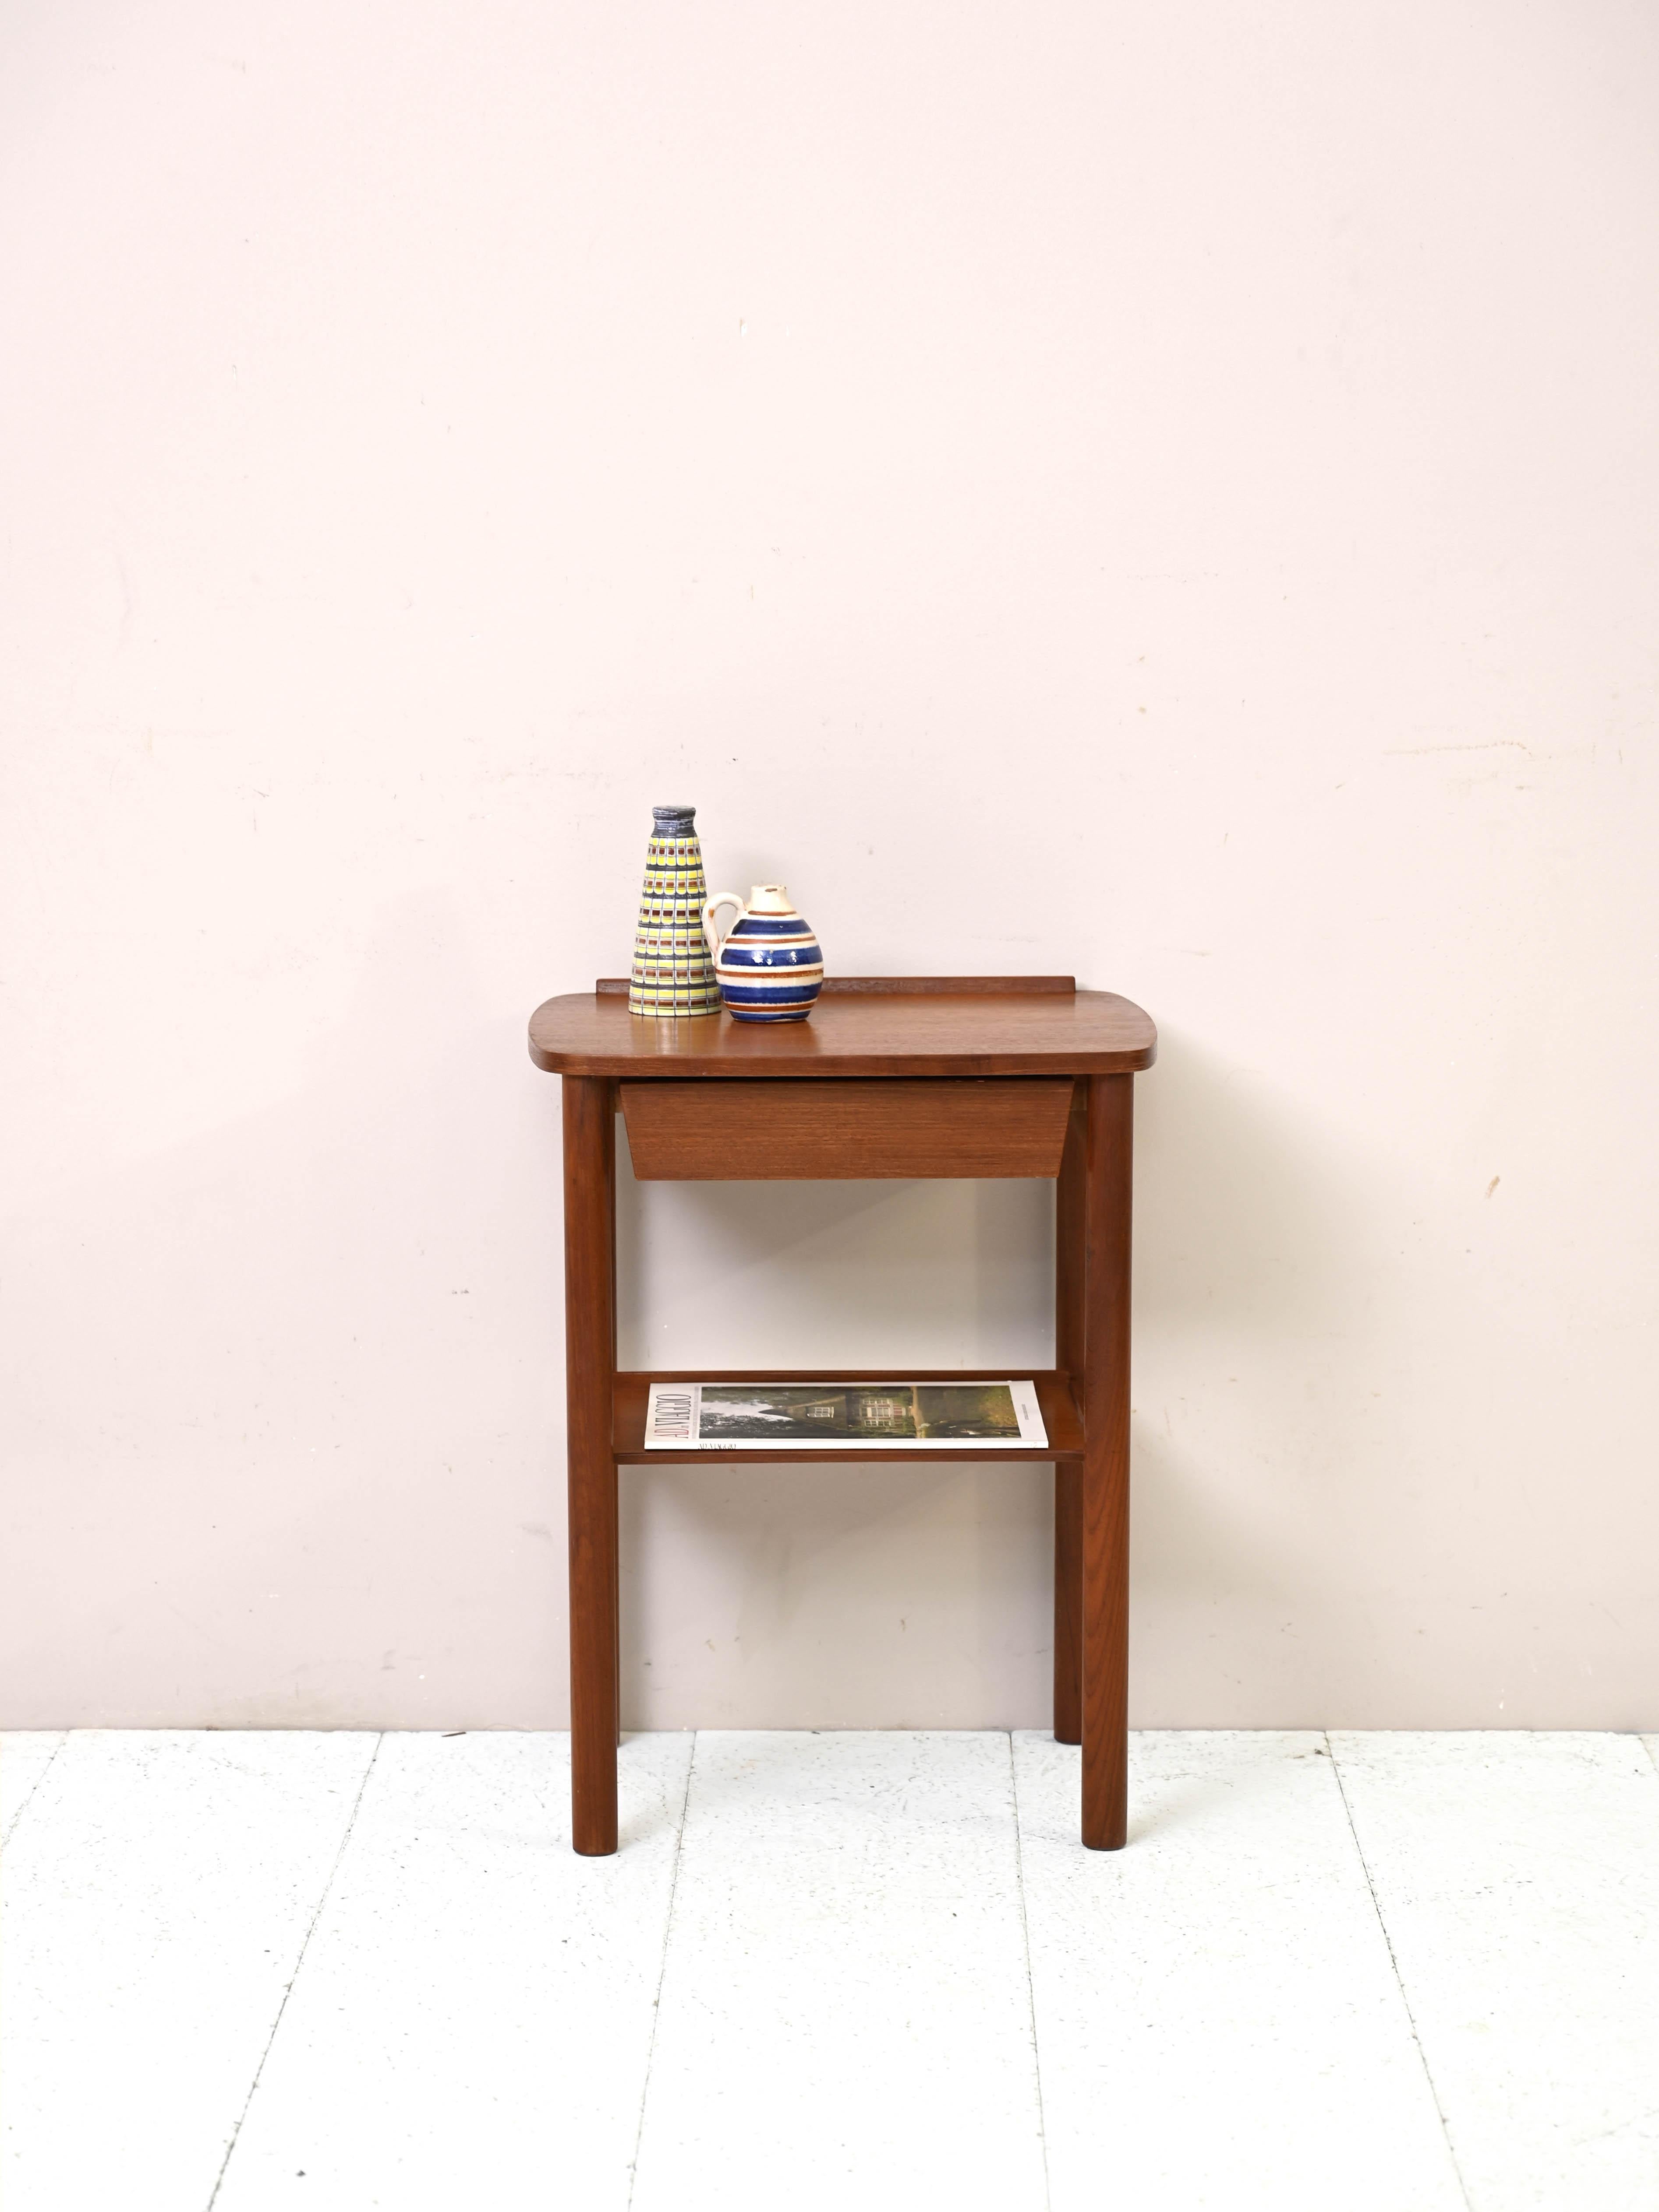 Vintage side table with drawer and magazine rack top.

A small bedside table in excellent original preservation.
It is distinguished by its compact shape and domed-edged top. A drawer and magazine rack top is present. The conical shaped legs make